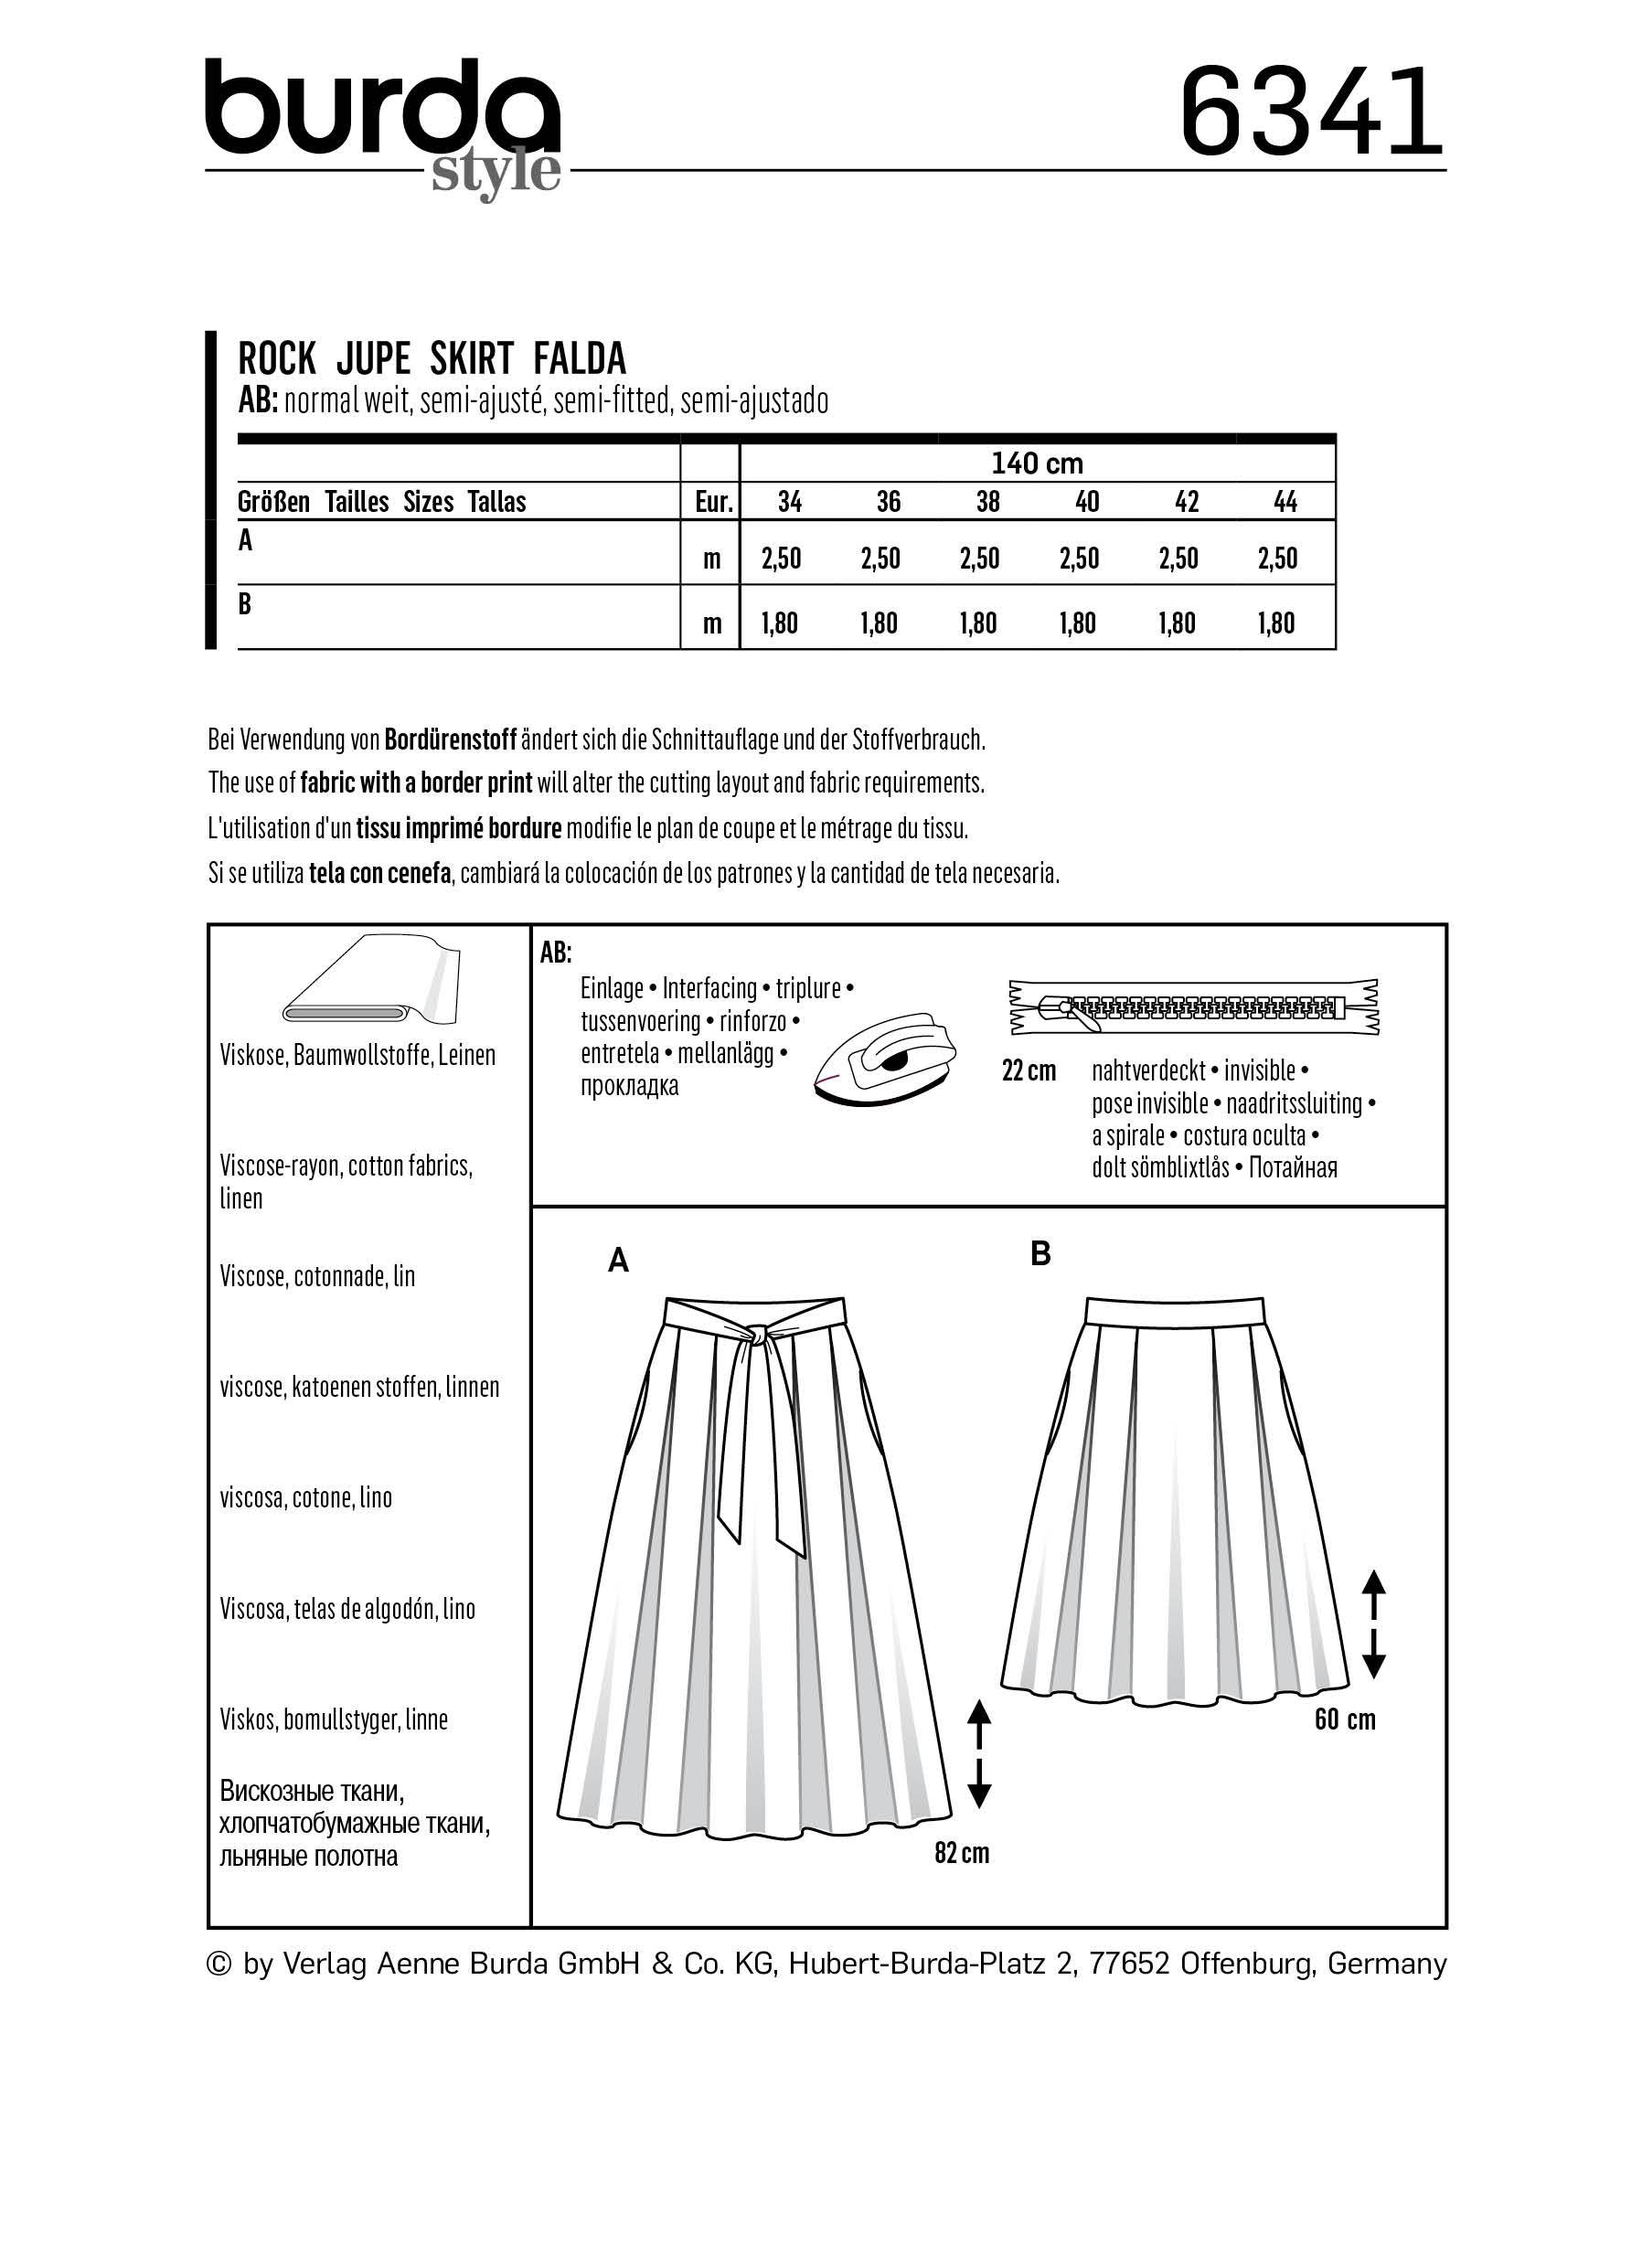 Box Pleated Skirts Pattern - Maridah's Ko-fi Shop - Ko-fi ❤️ Where creators  get support from fans through donations, memberships, shop sales and more!  The original 'Buy Me a Coffee' Page.